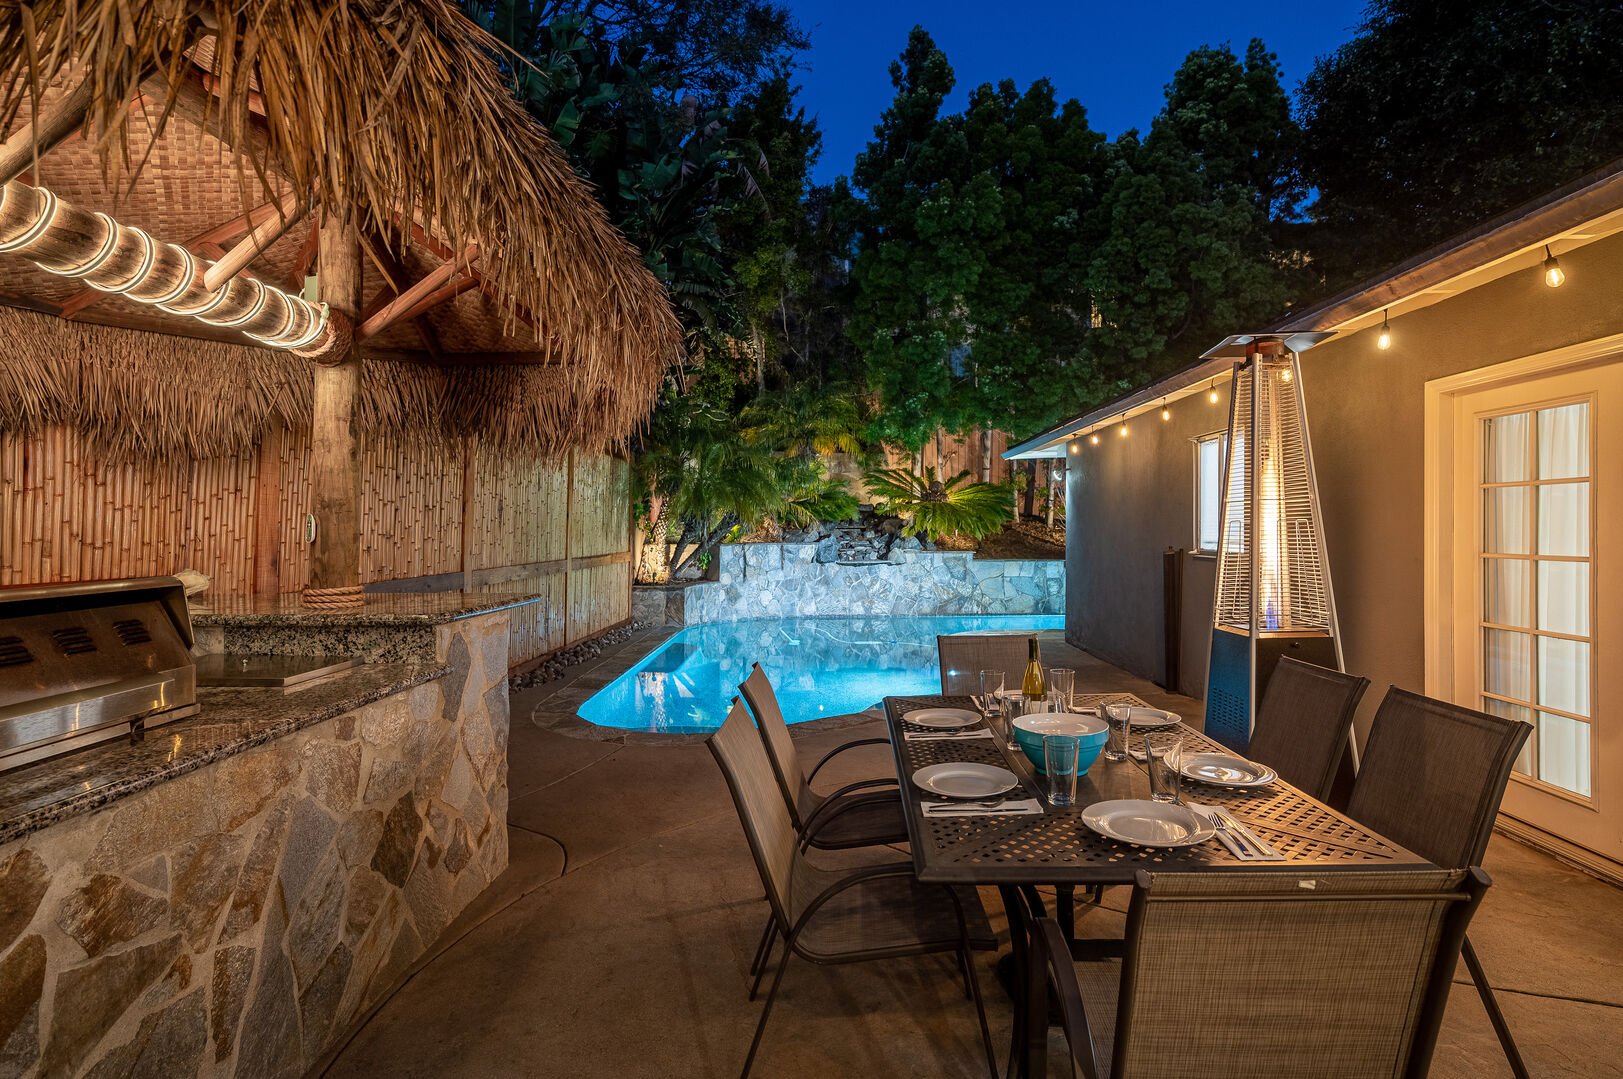 The large outdoor patio and pool area is an oasis complete with fire pit, jacuzzi, and wood cabana with lounge seating